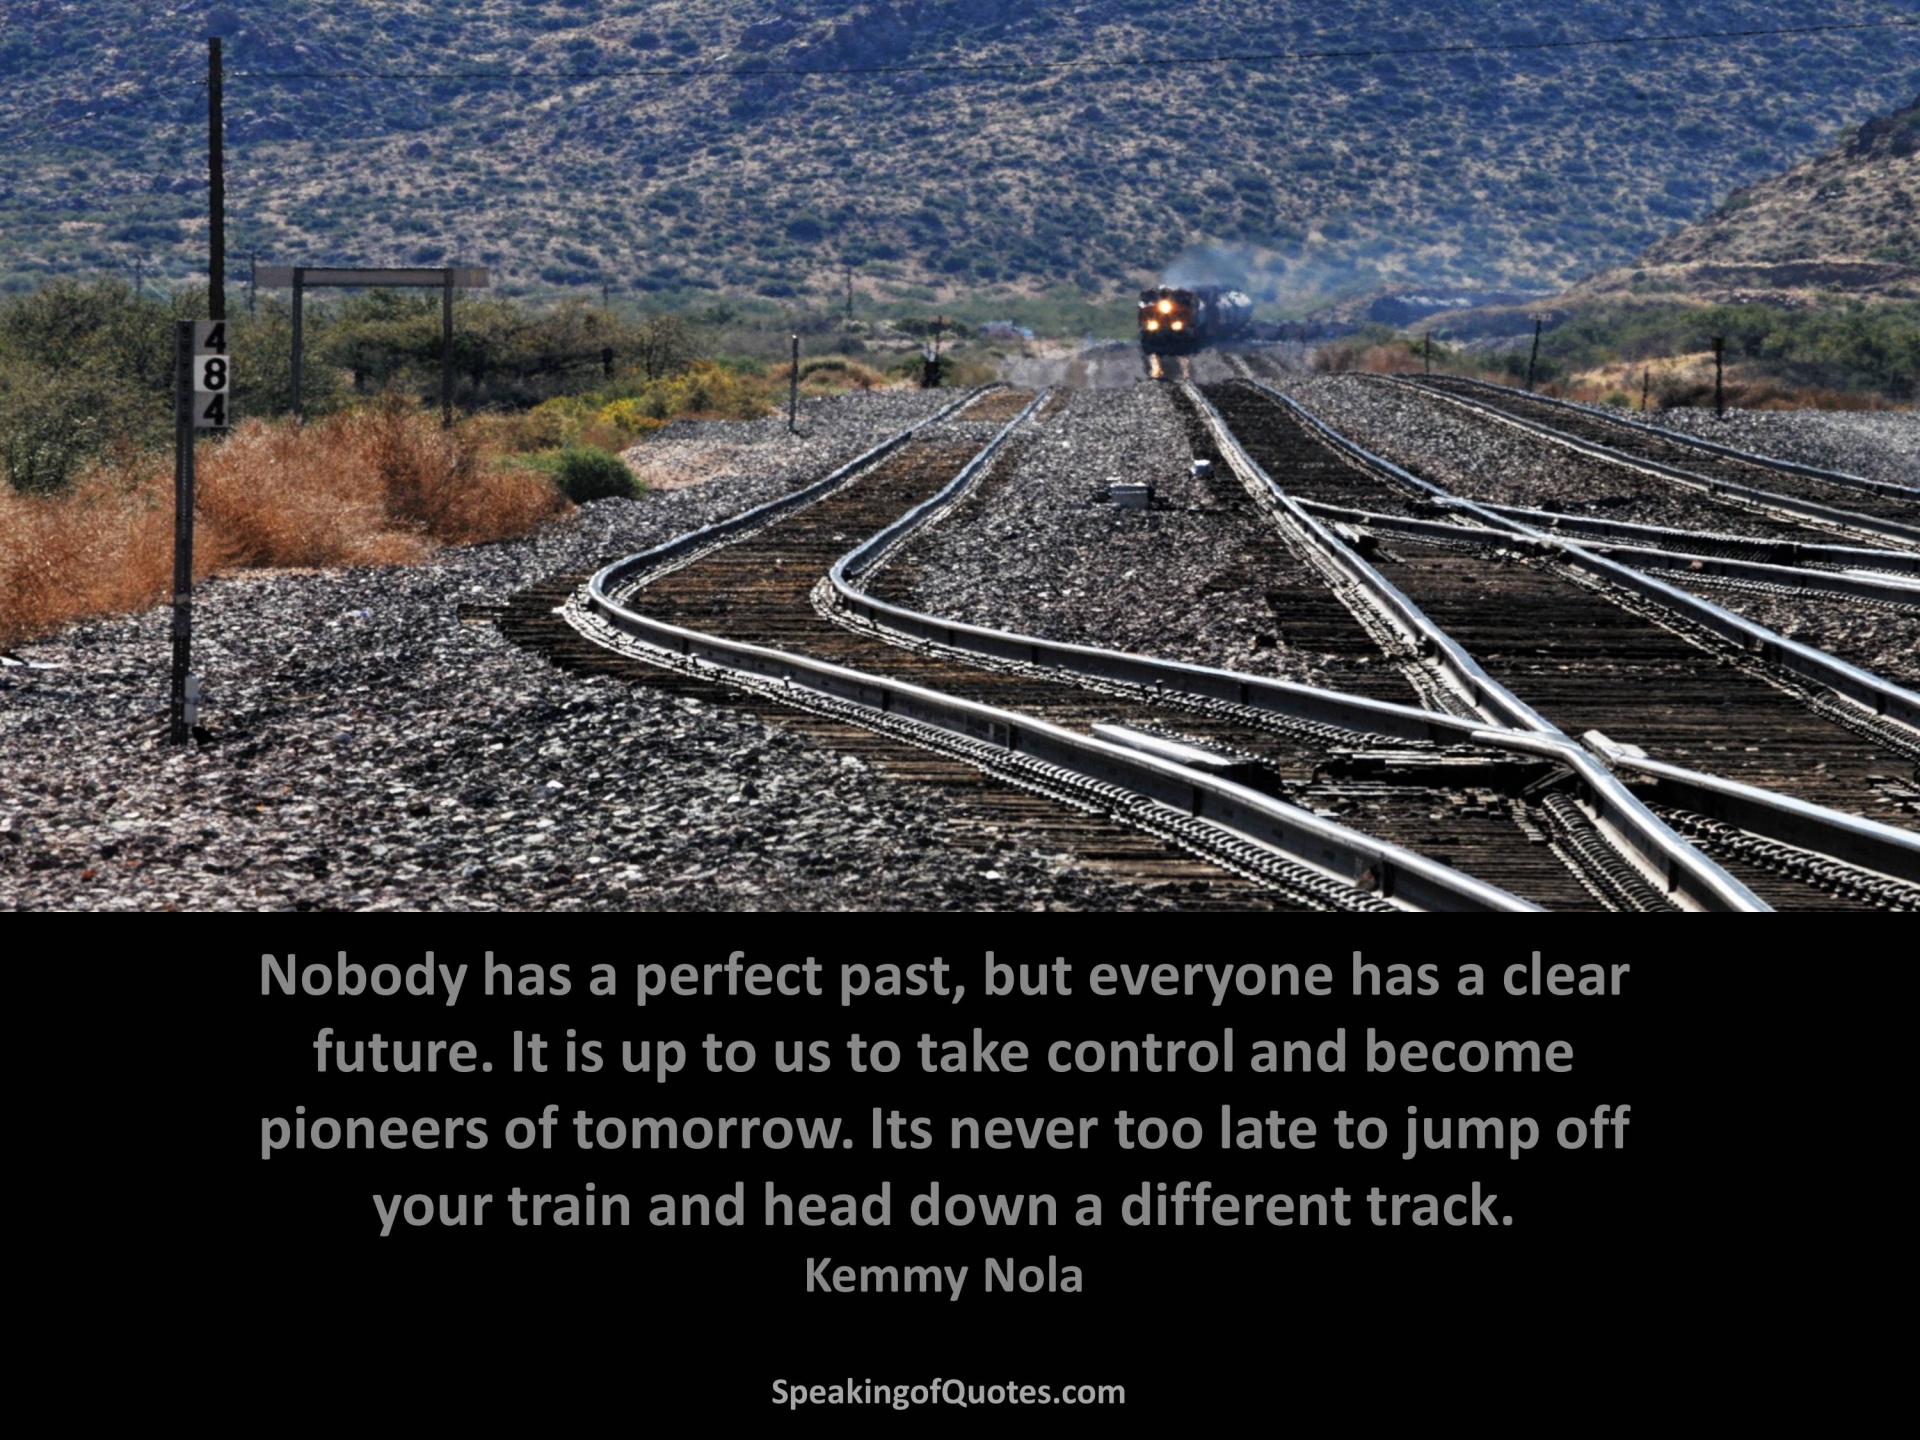 11+ Quotes About Trains